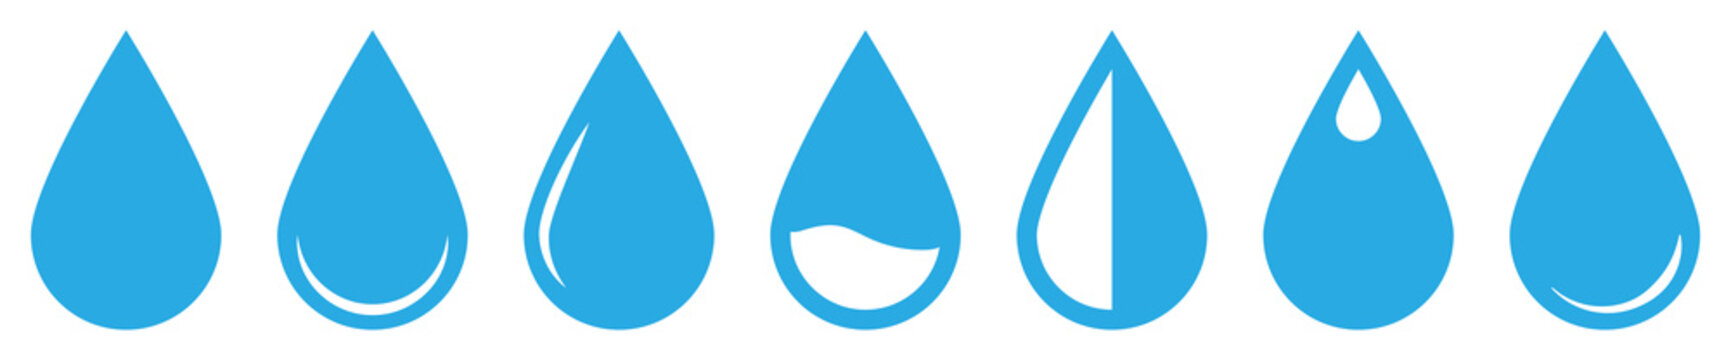 Water drop icons set. Vector illustration isolated on white background